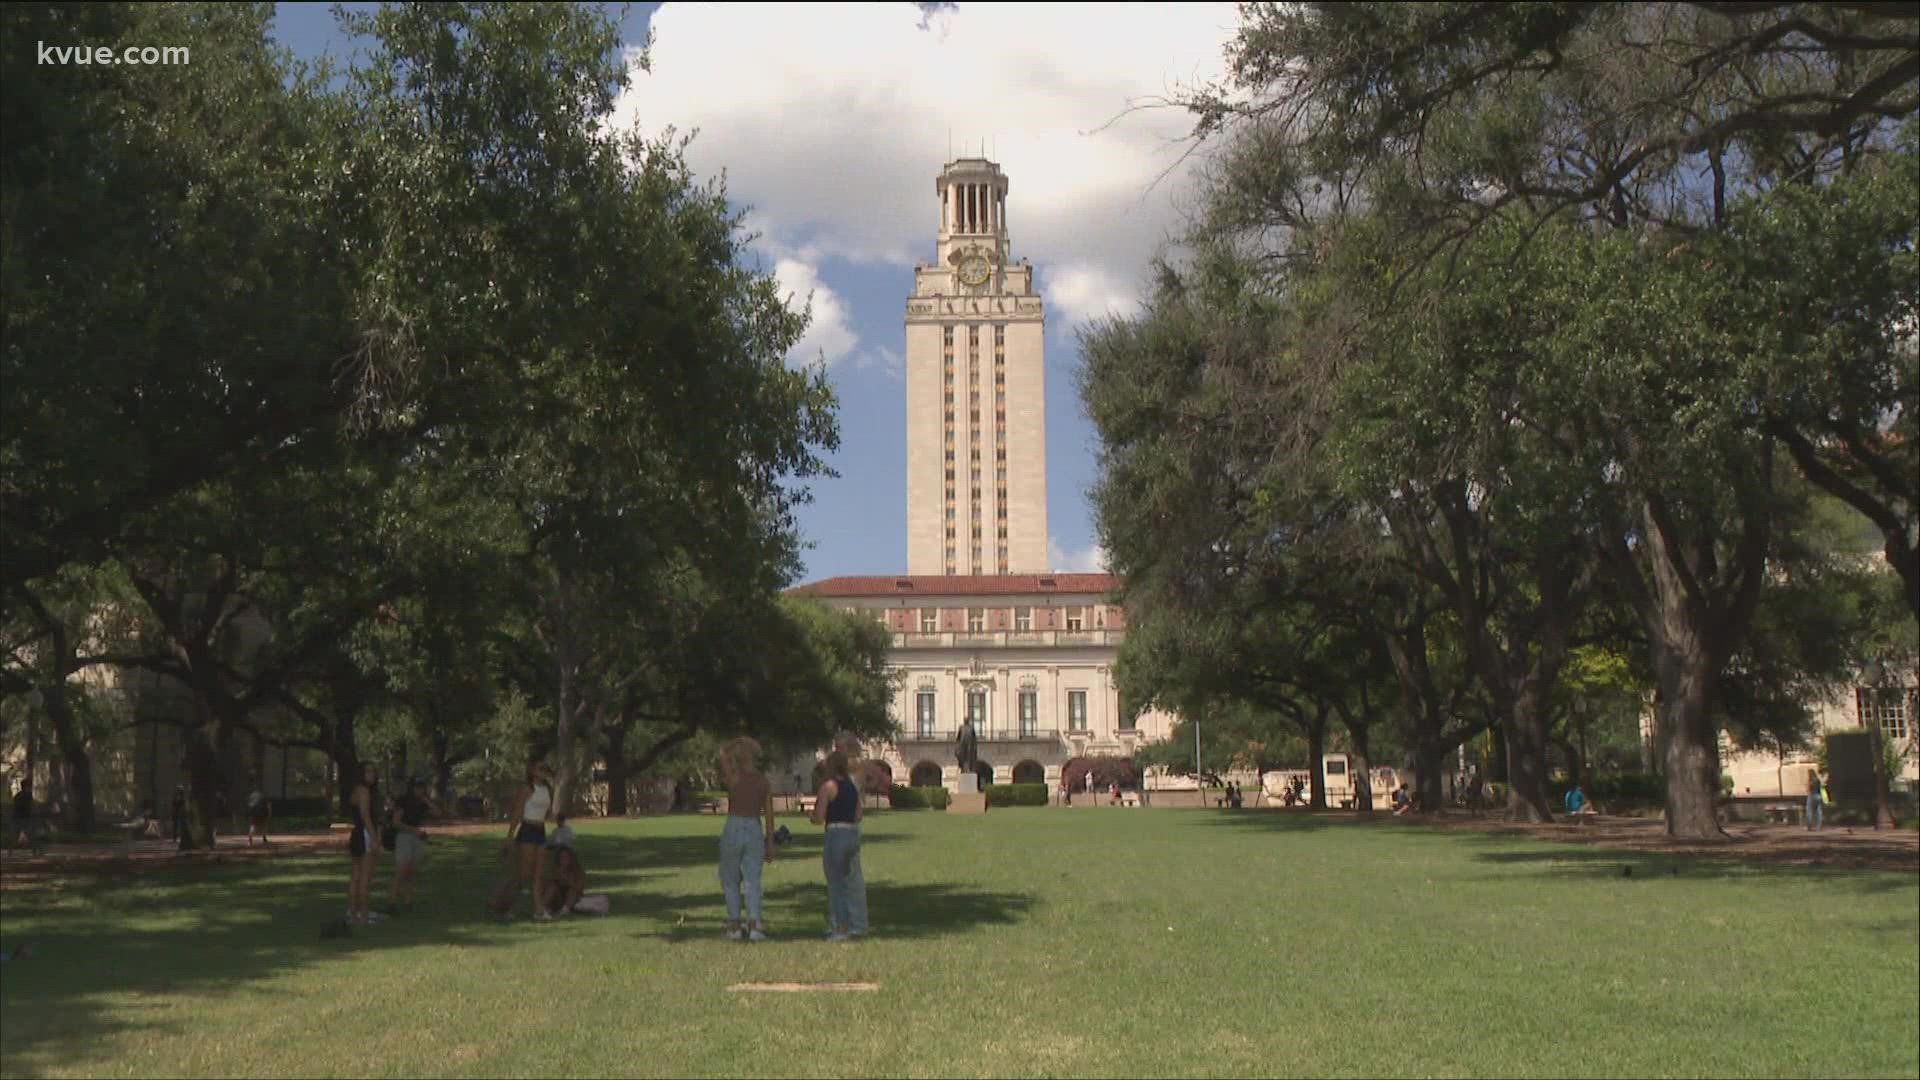 The University of Texas at Austin is ranking among the top universities in the country.